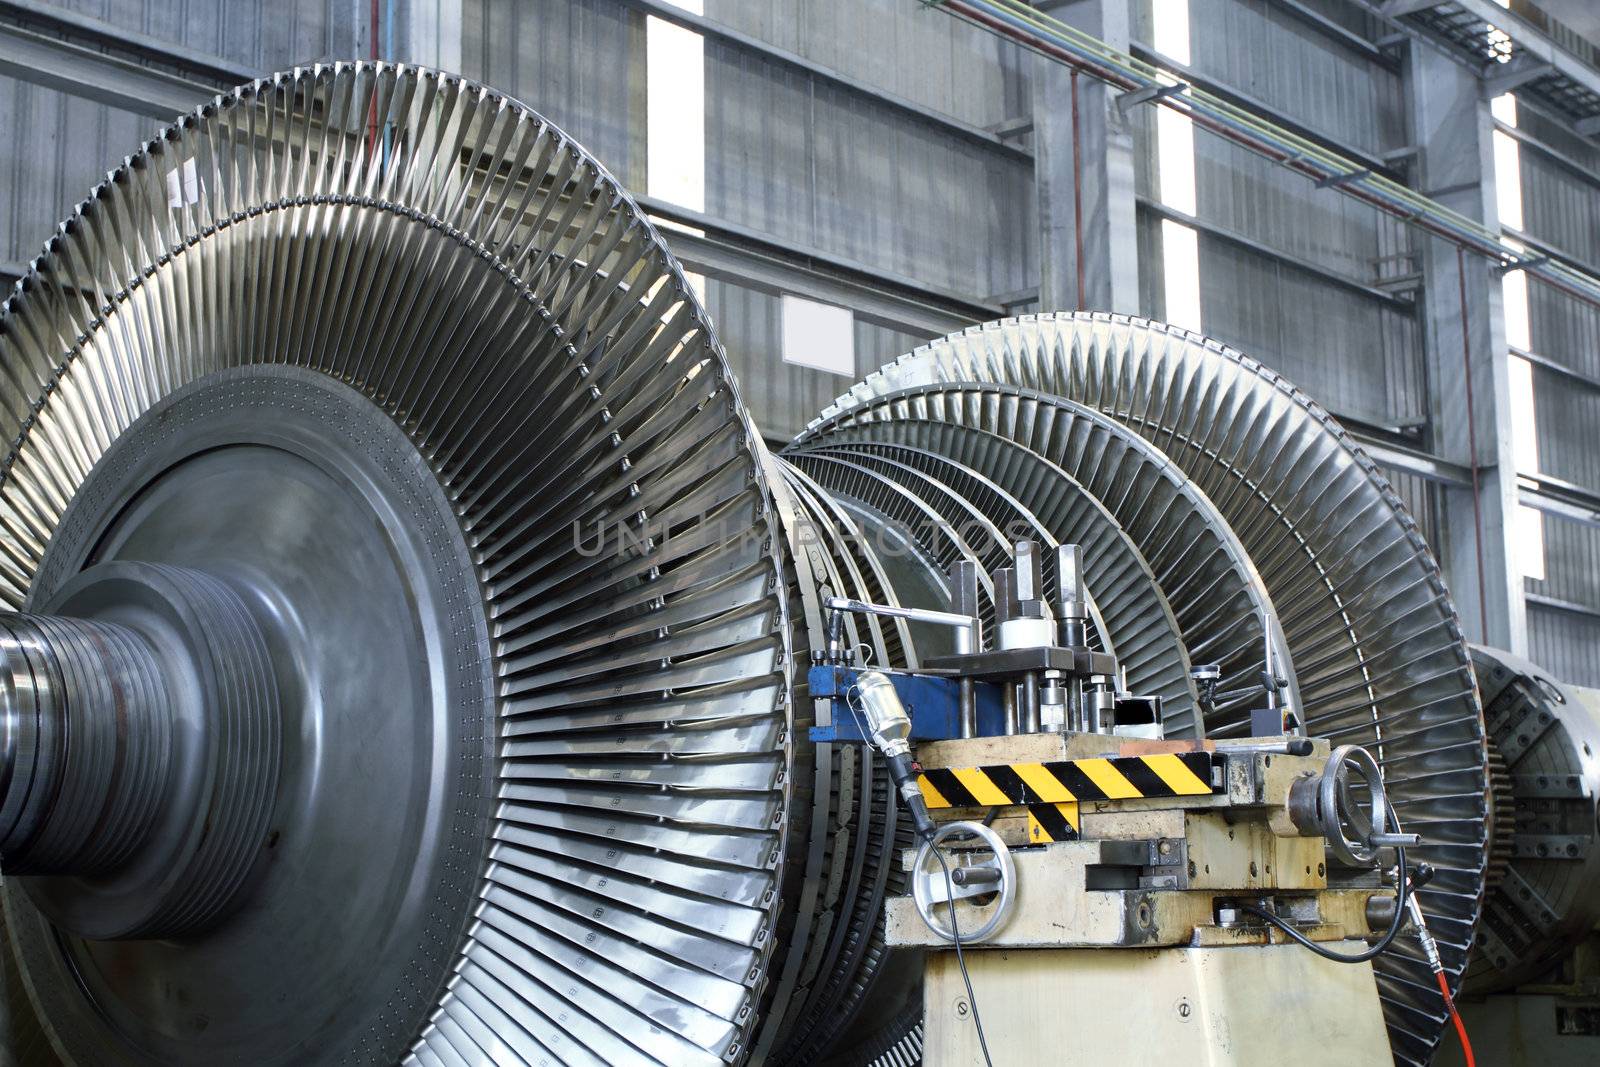 Turbine at workshop by photosoup